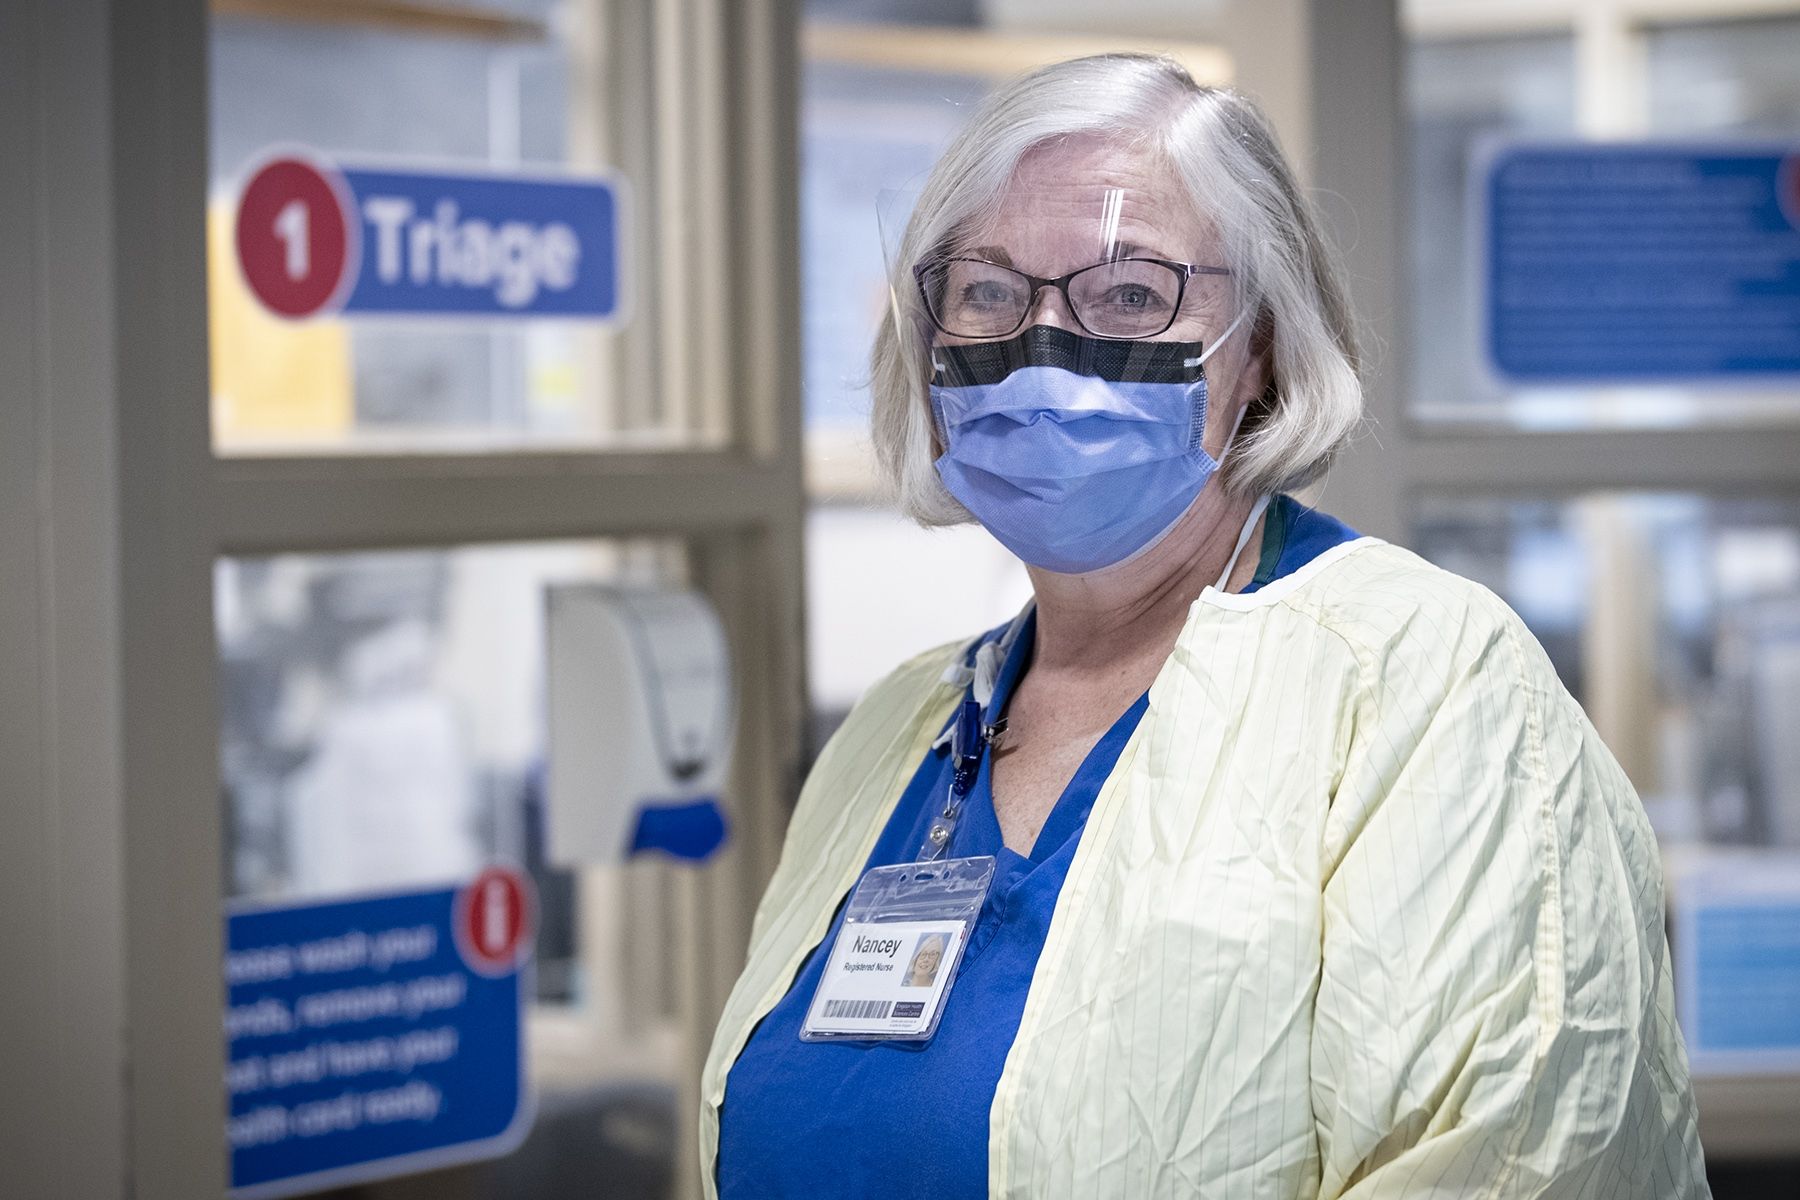 Nancey Martindale pictured inside KHSC's Emergency Department has short grey hair. She wear glasses and is photographed wearing a mask, blue scrubs and a yellow gown.